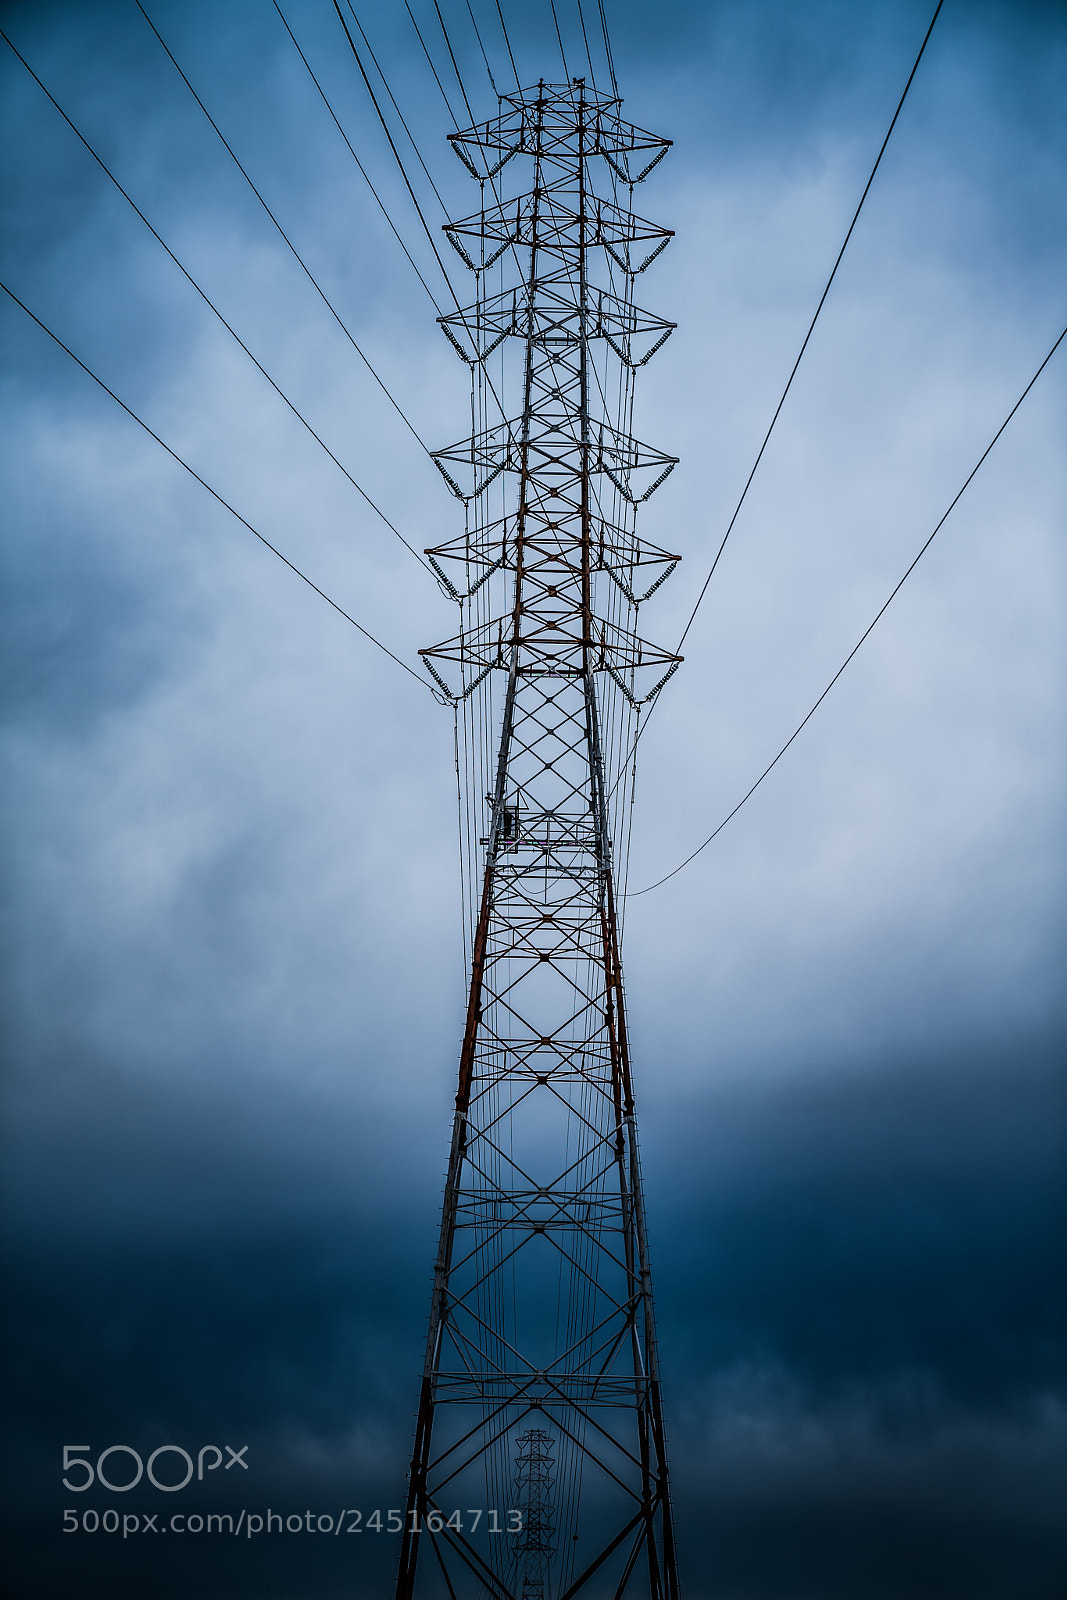 Sony a7R II sample photo. The transmission towers photography